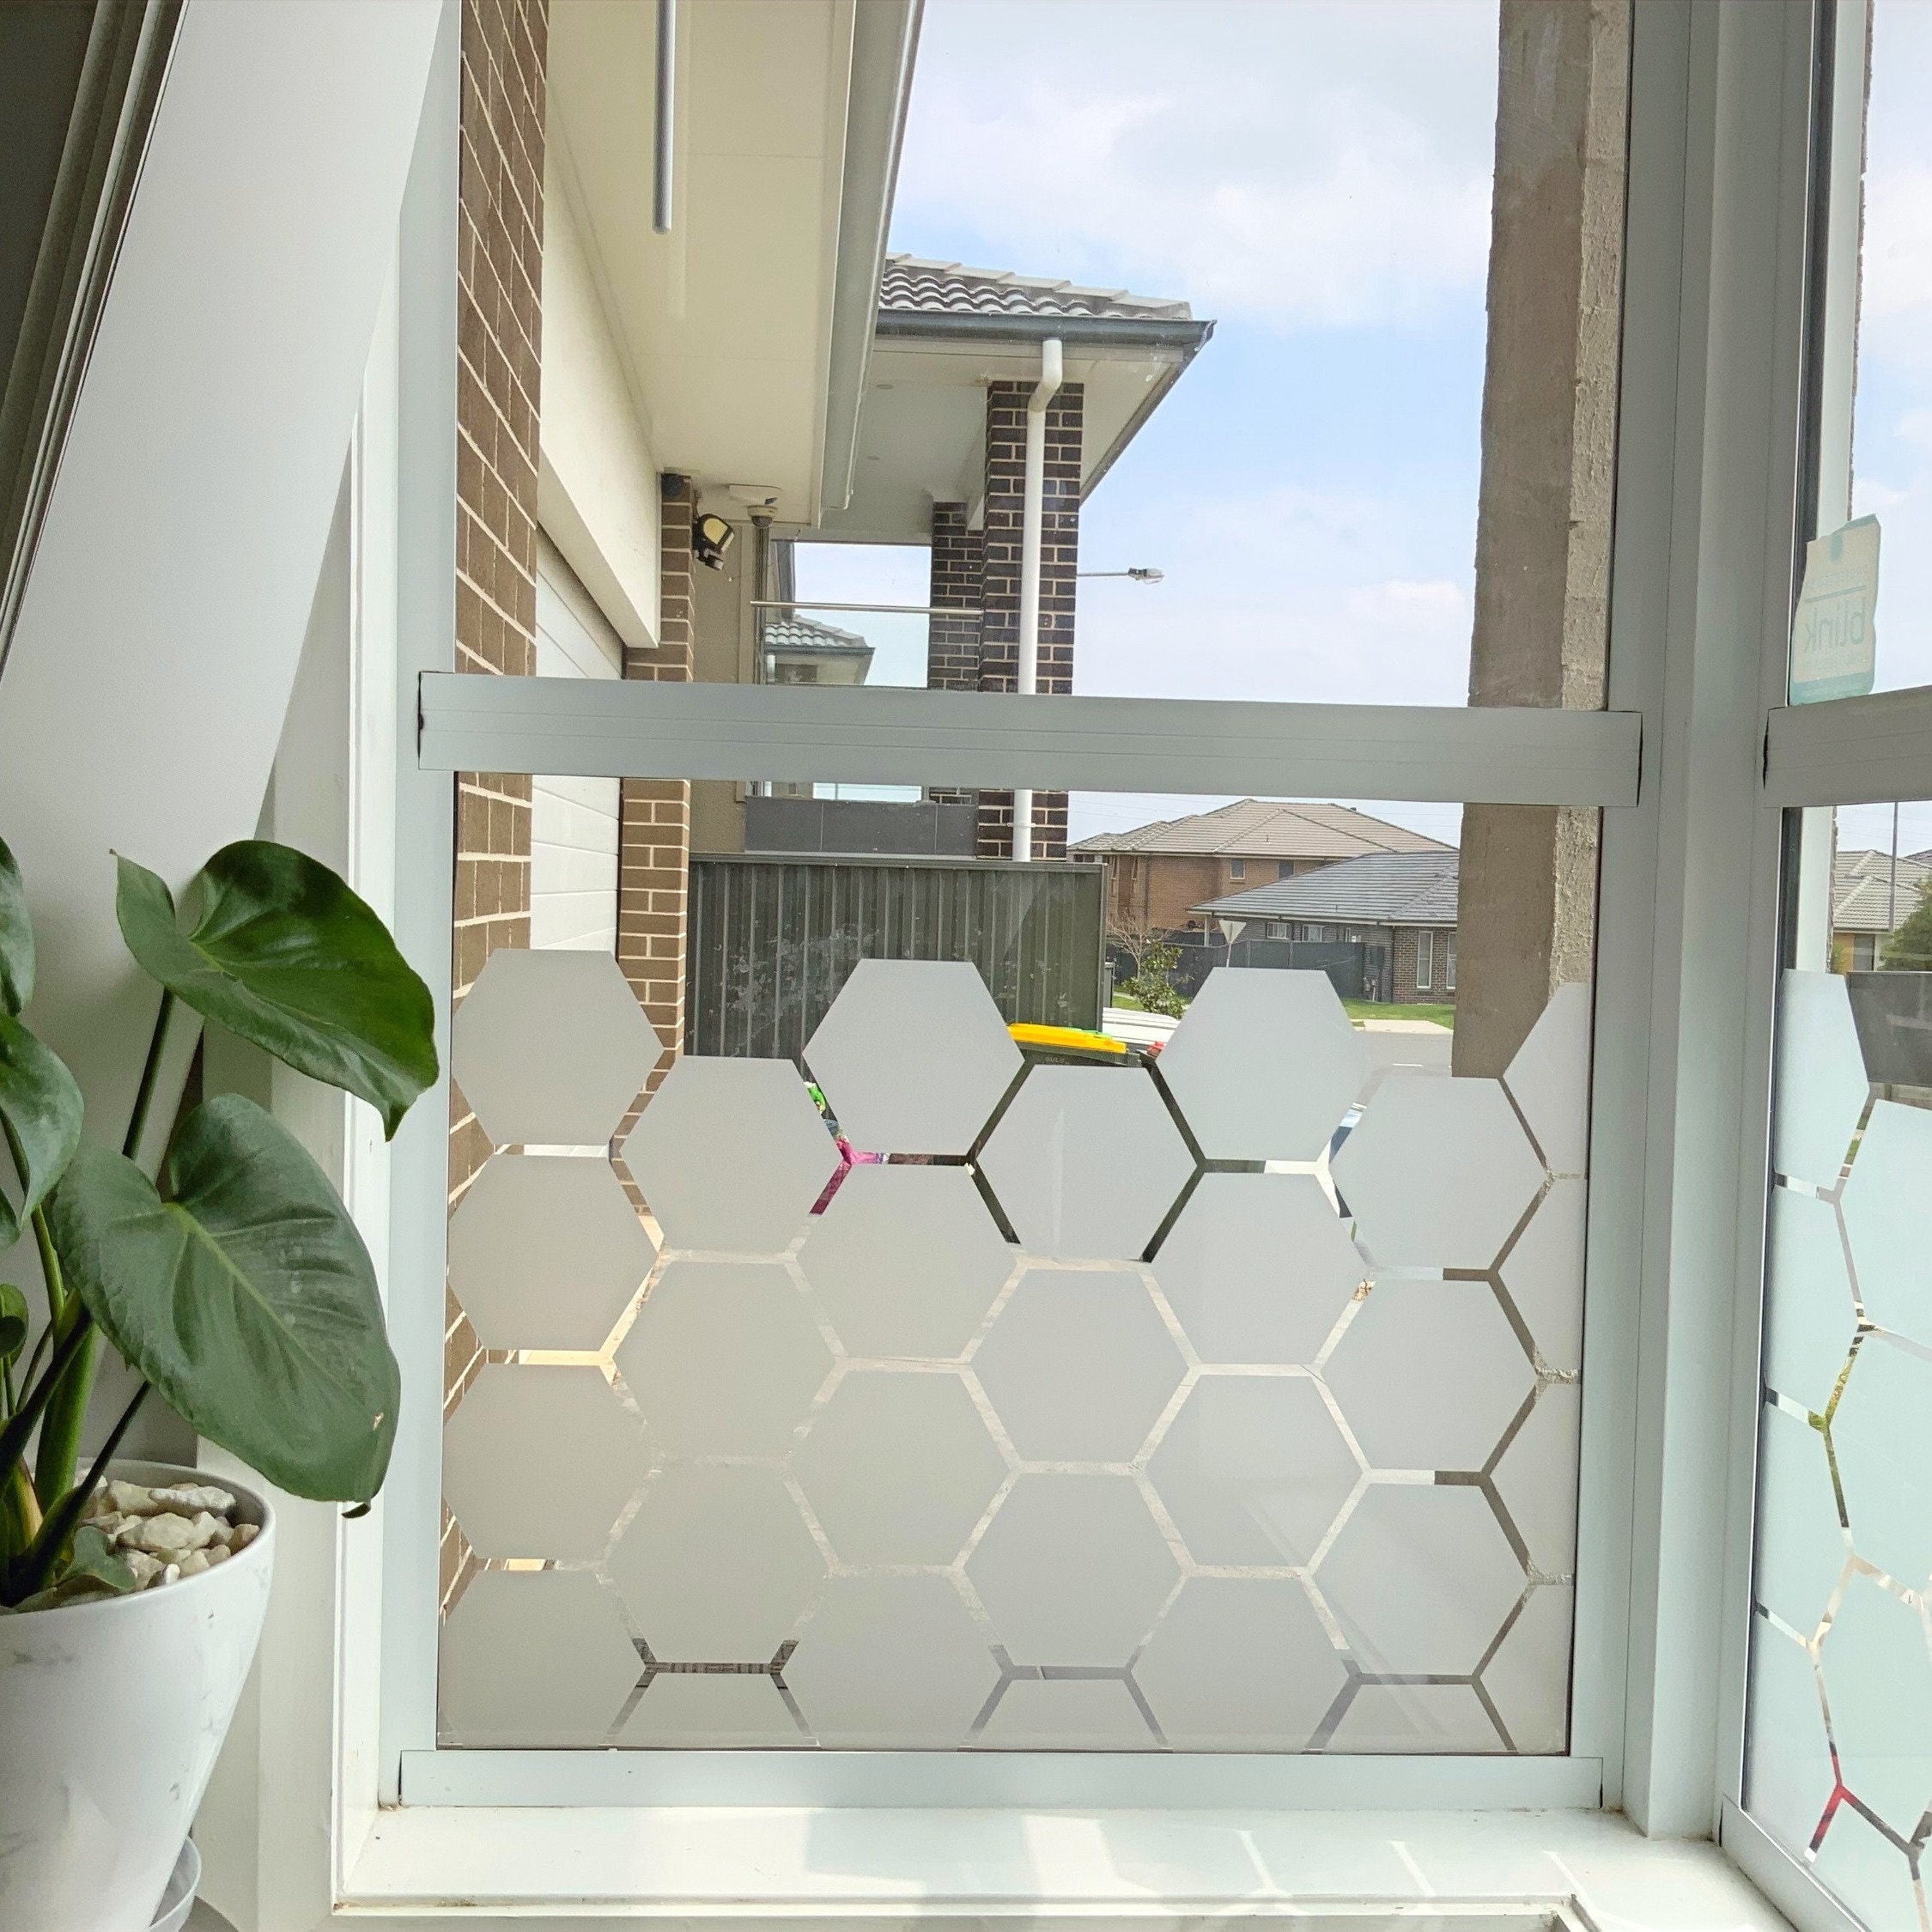 Customized glass stickers for bathroom windows, transparent and opaque,  anti-peeping and shading frosted film, window decals